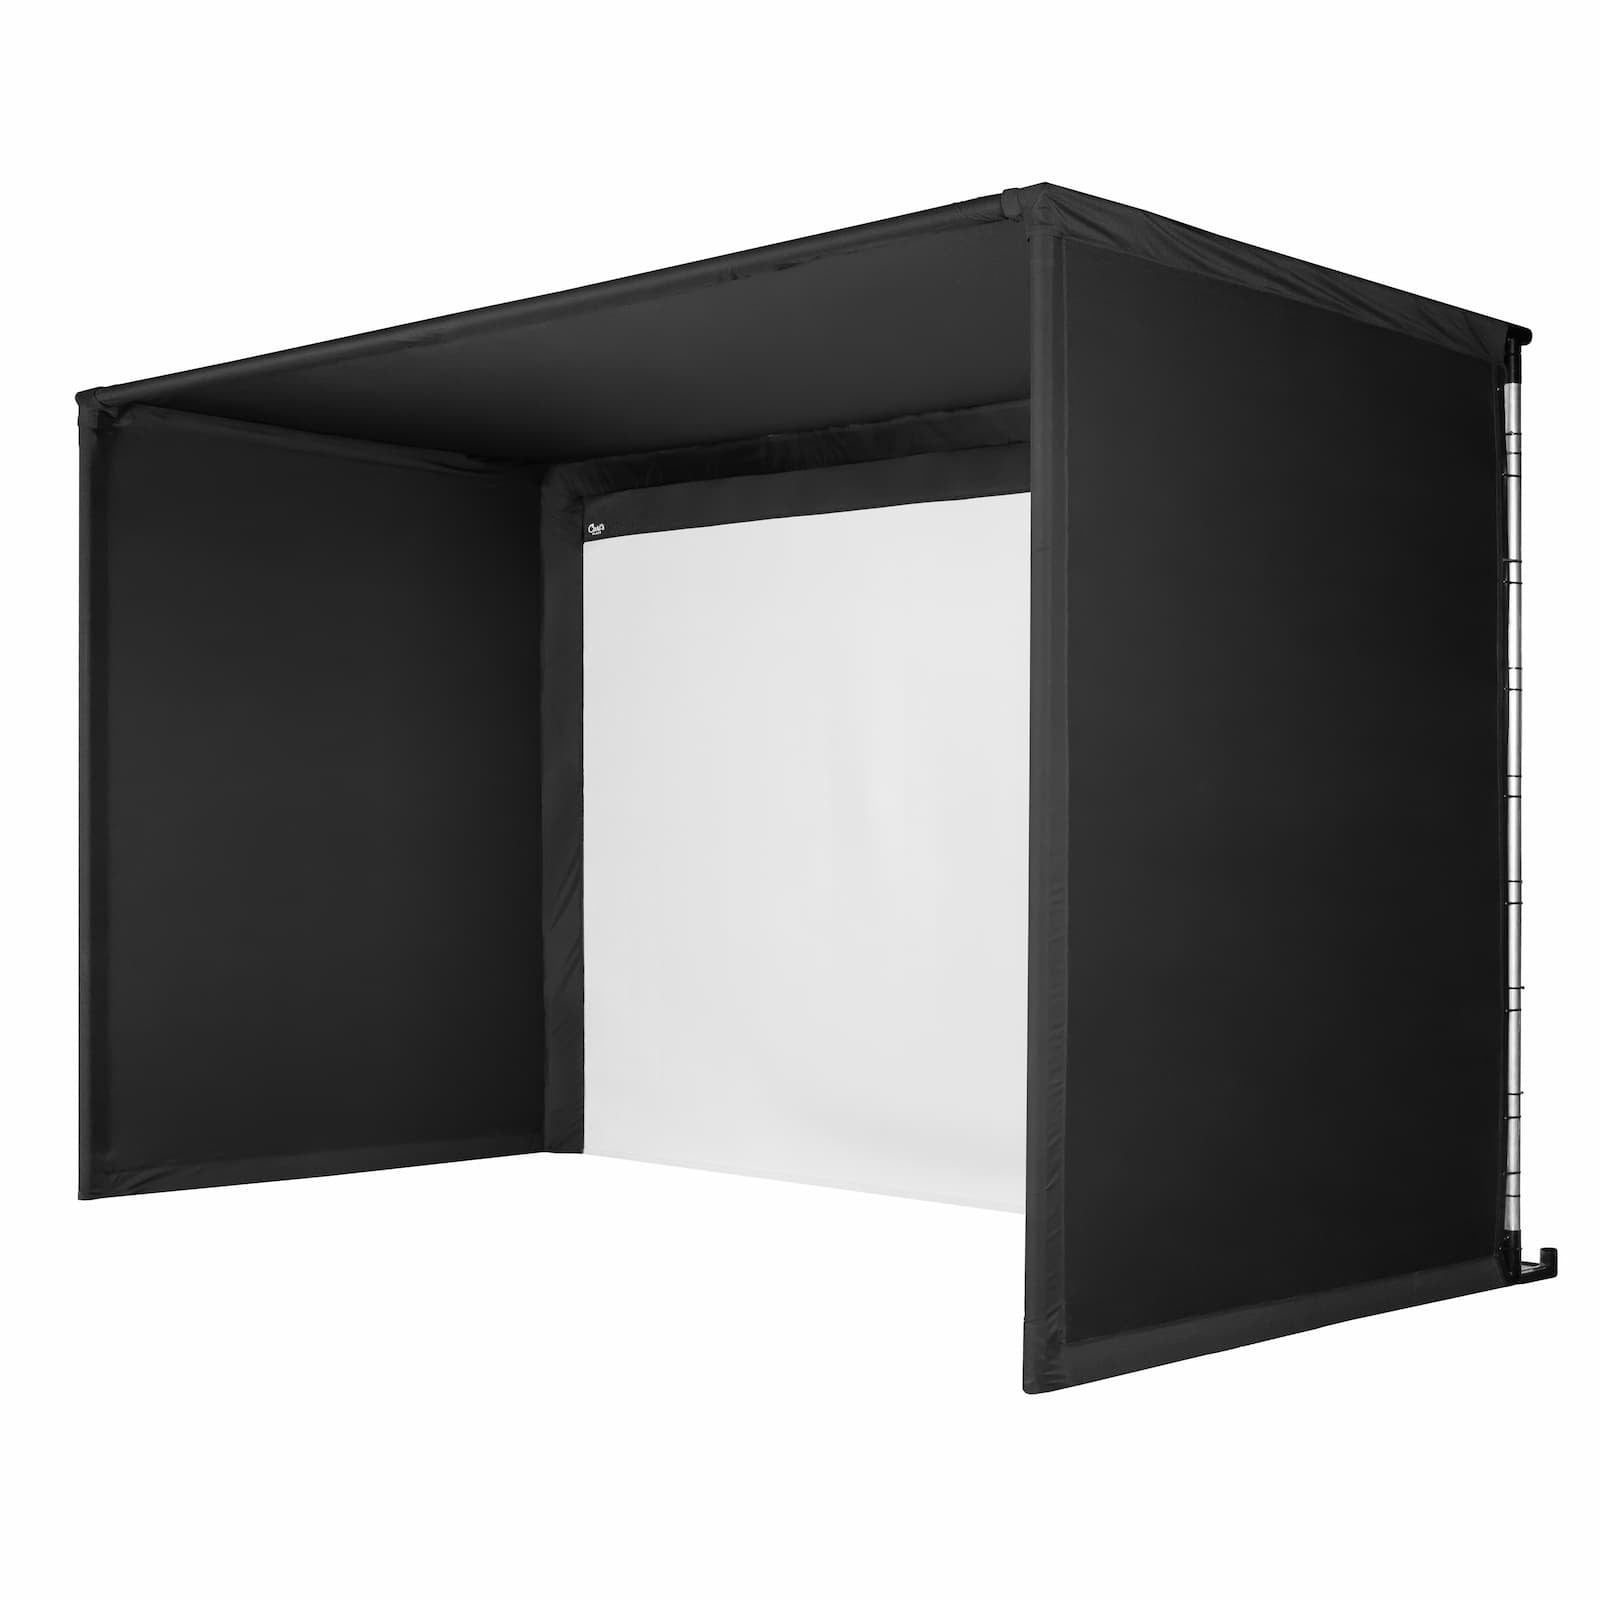 Carl's Place New C-Series! PRO Golf Simulator Enclosure Kit with Impact Screen